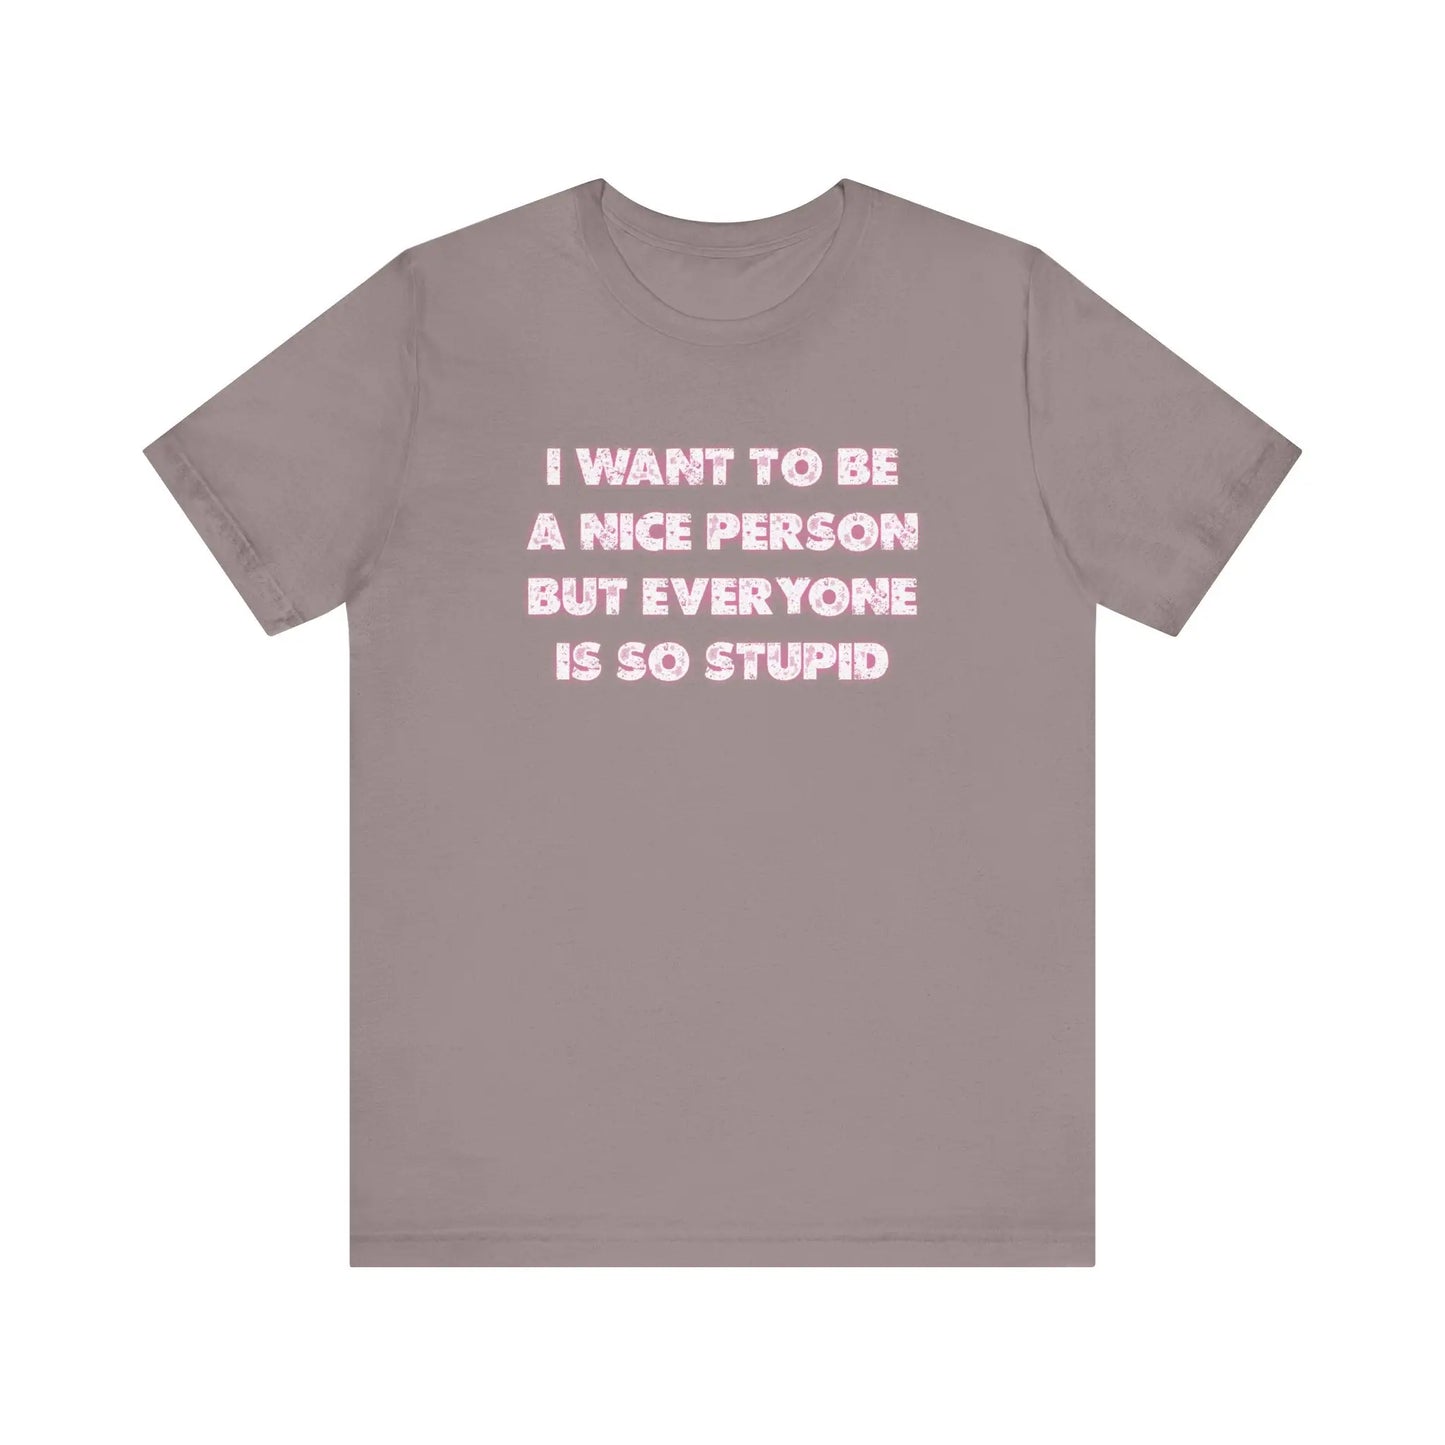 I Want To Be A Nice Person Women's Tee - Wicked Tees